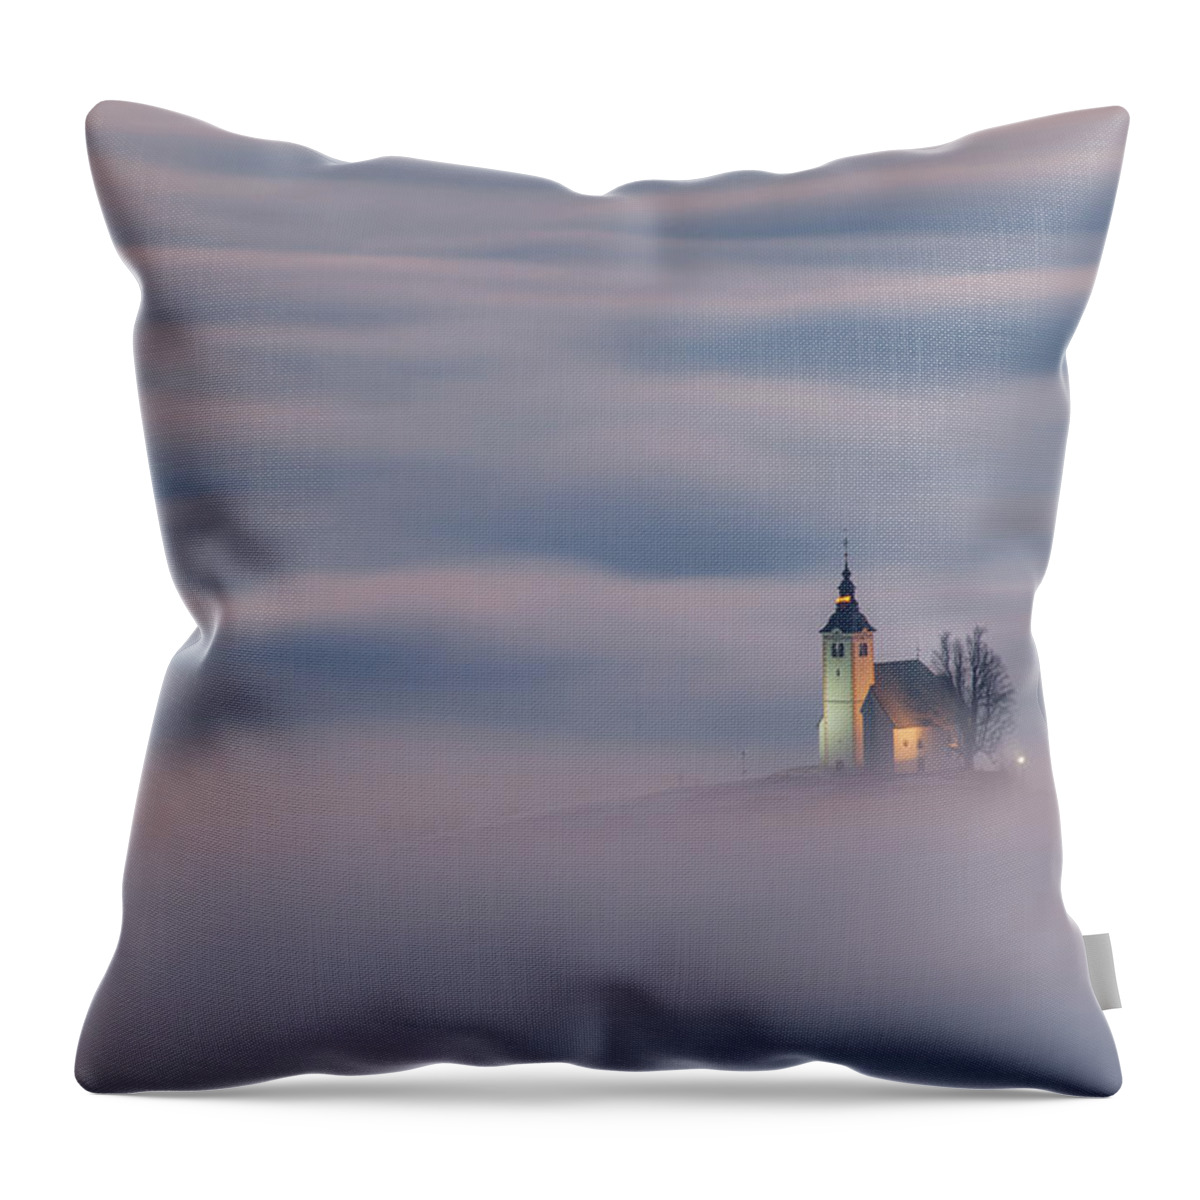 Church Throw Pillow featuring the photograph The Boat II by Piotr Skrzypiec